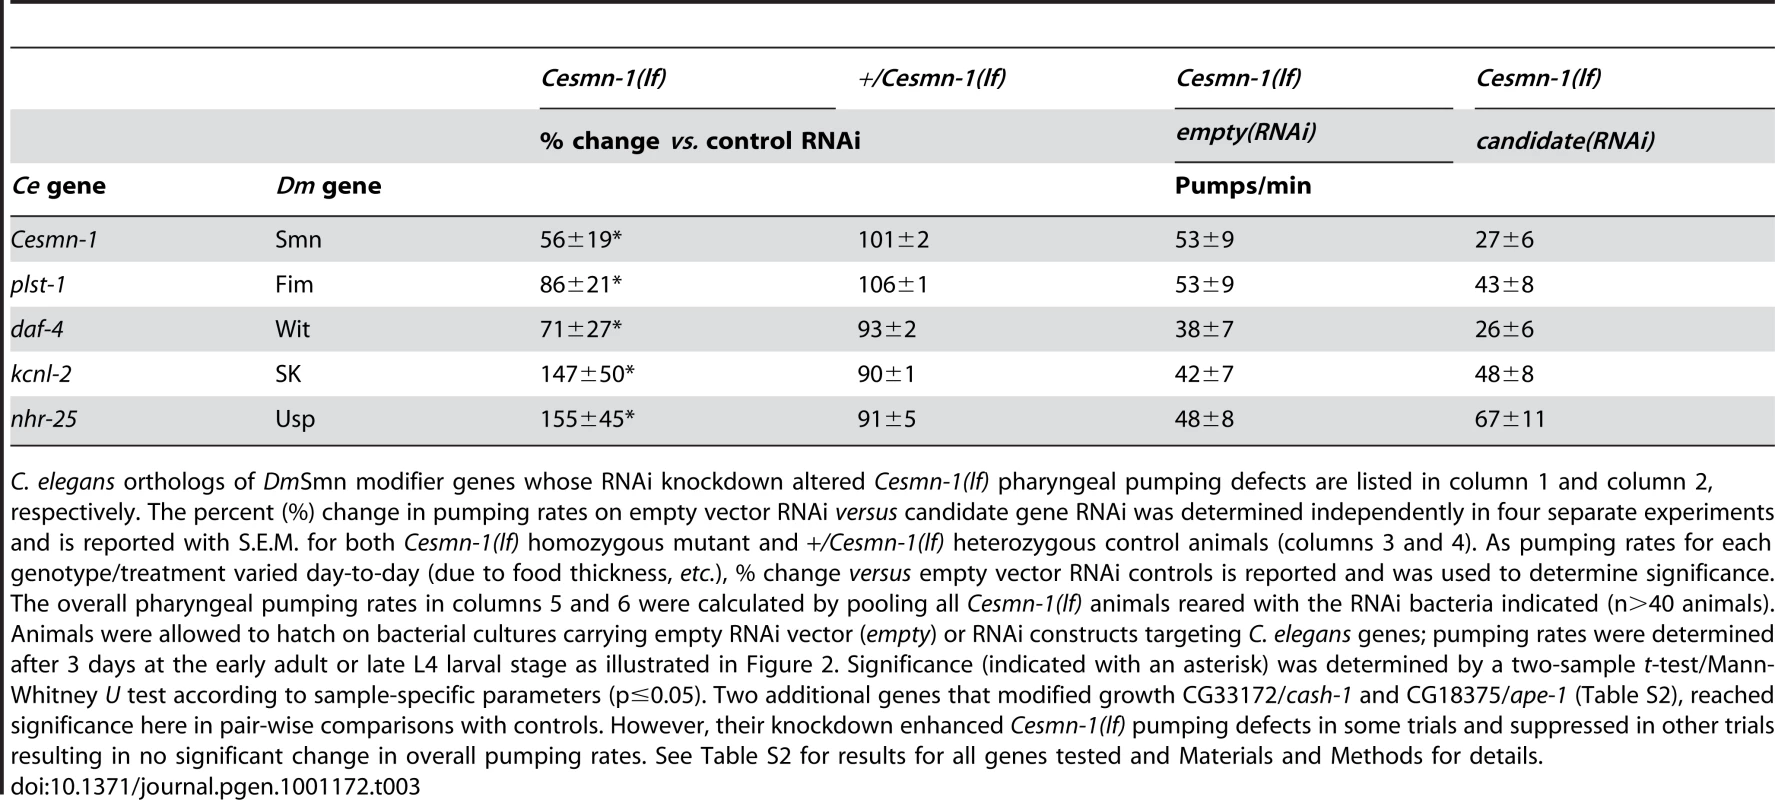 RNAi knockdown of candidate genes alters <i>Cesmn-1(lf)</i> neuromuscular defects in the pharyngeal pumping assay.